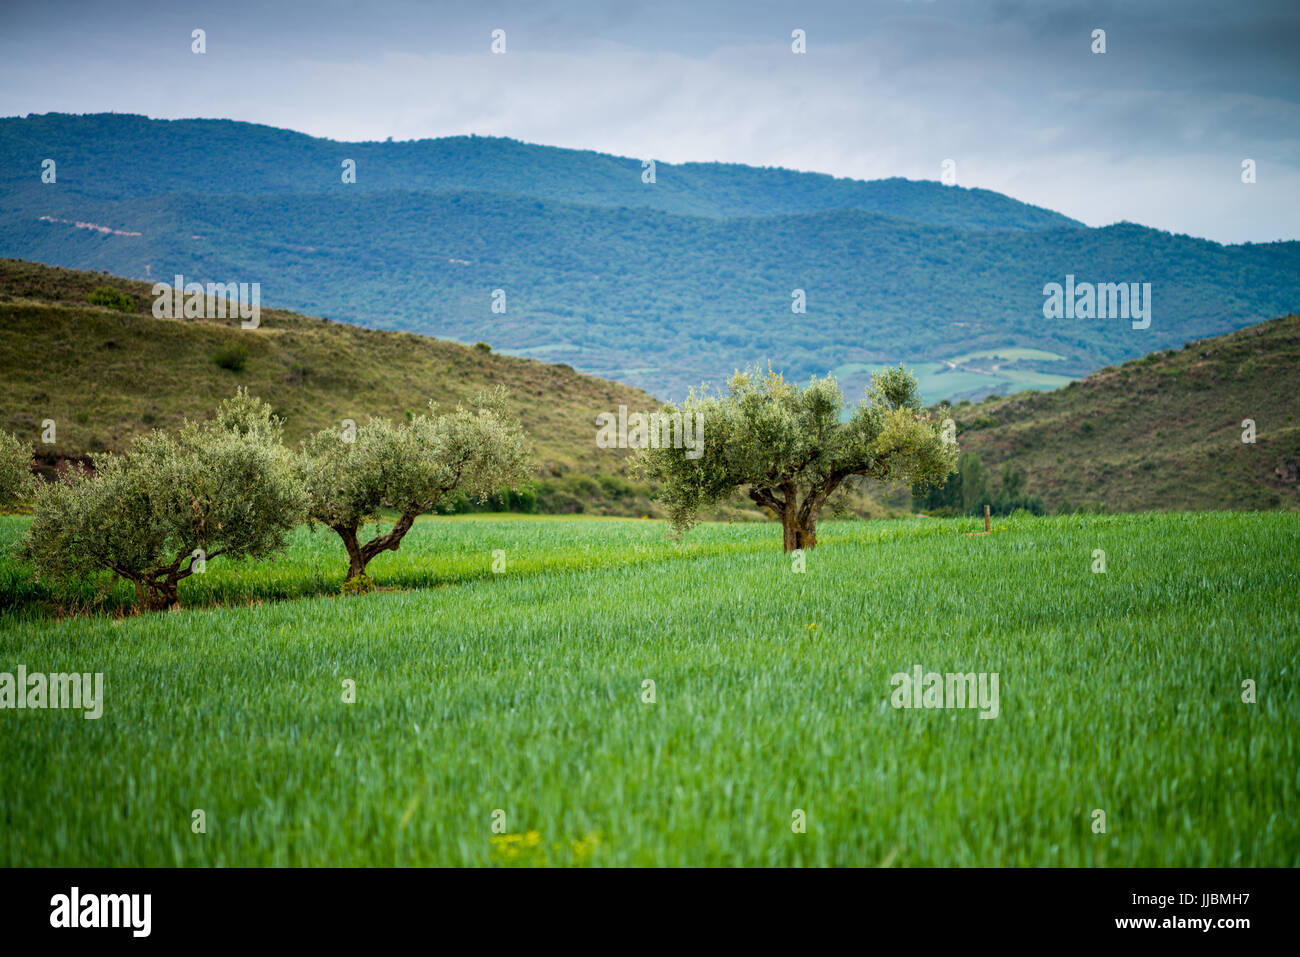 Landscape with oliv trees and fields on the way from Pamplona to Logrono, Camino de Santiago, Spain, Europe Stock Photo